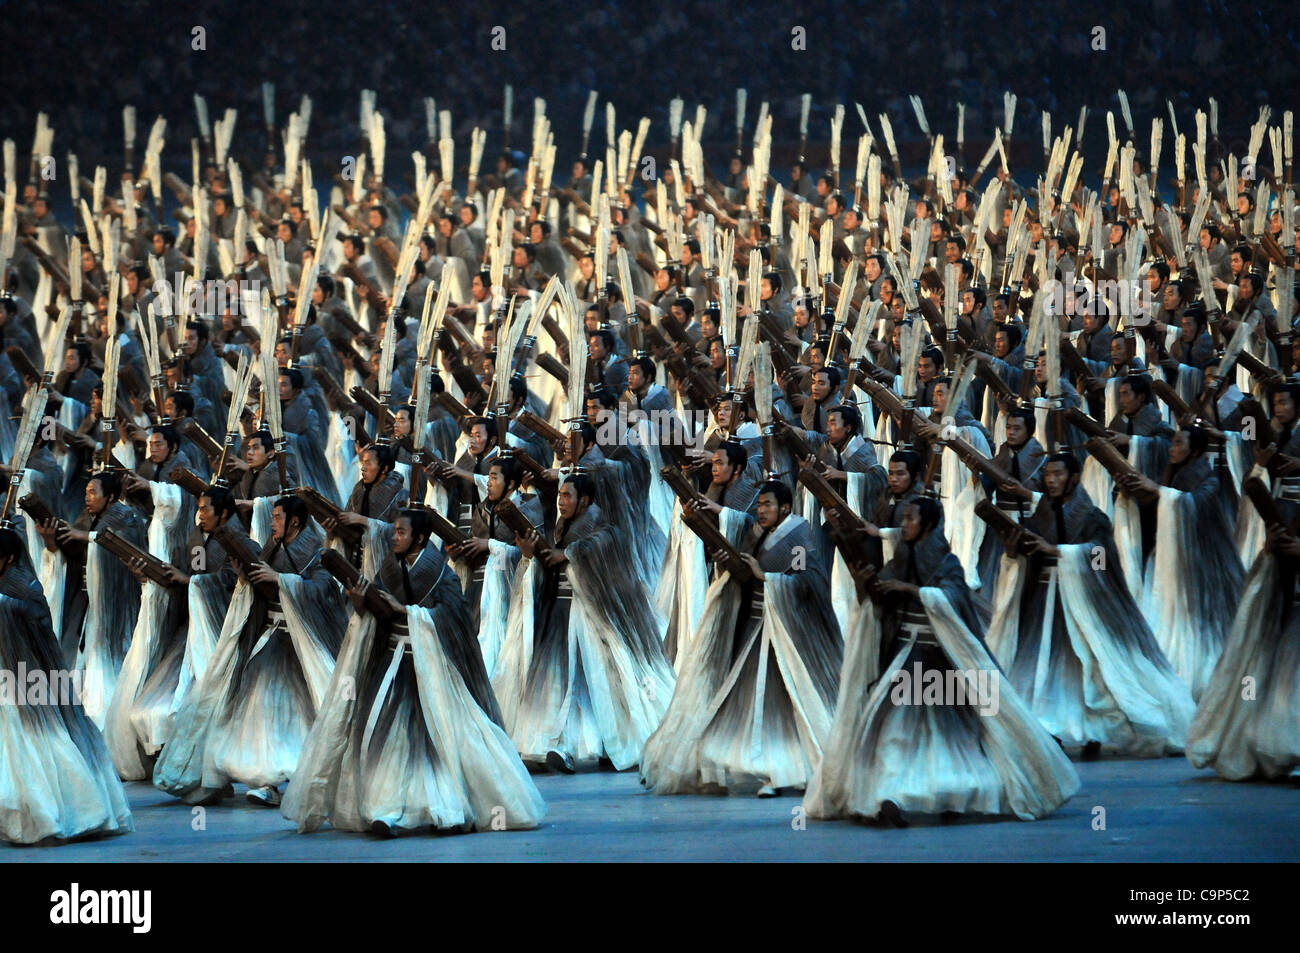 AUGUST 8, 2008 - Opening Ceremony : Performers dance during the opening ceremony for the 2008 Beijing Summer Olympics Games at the National Stadium on August 8, 2008 in Beijing, China. (Photo by AFLO SPORT) [0005] Stock Photo